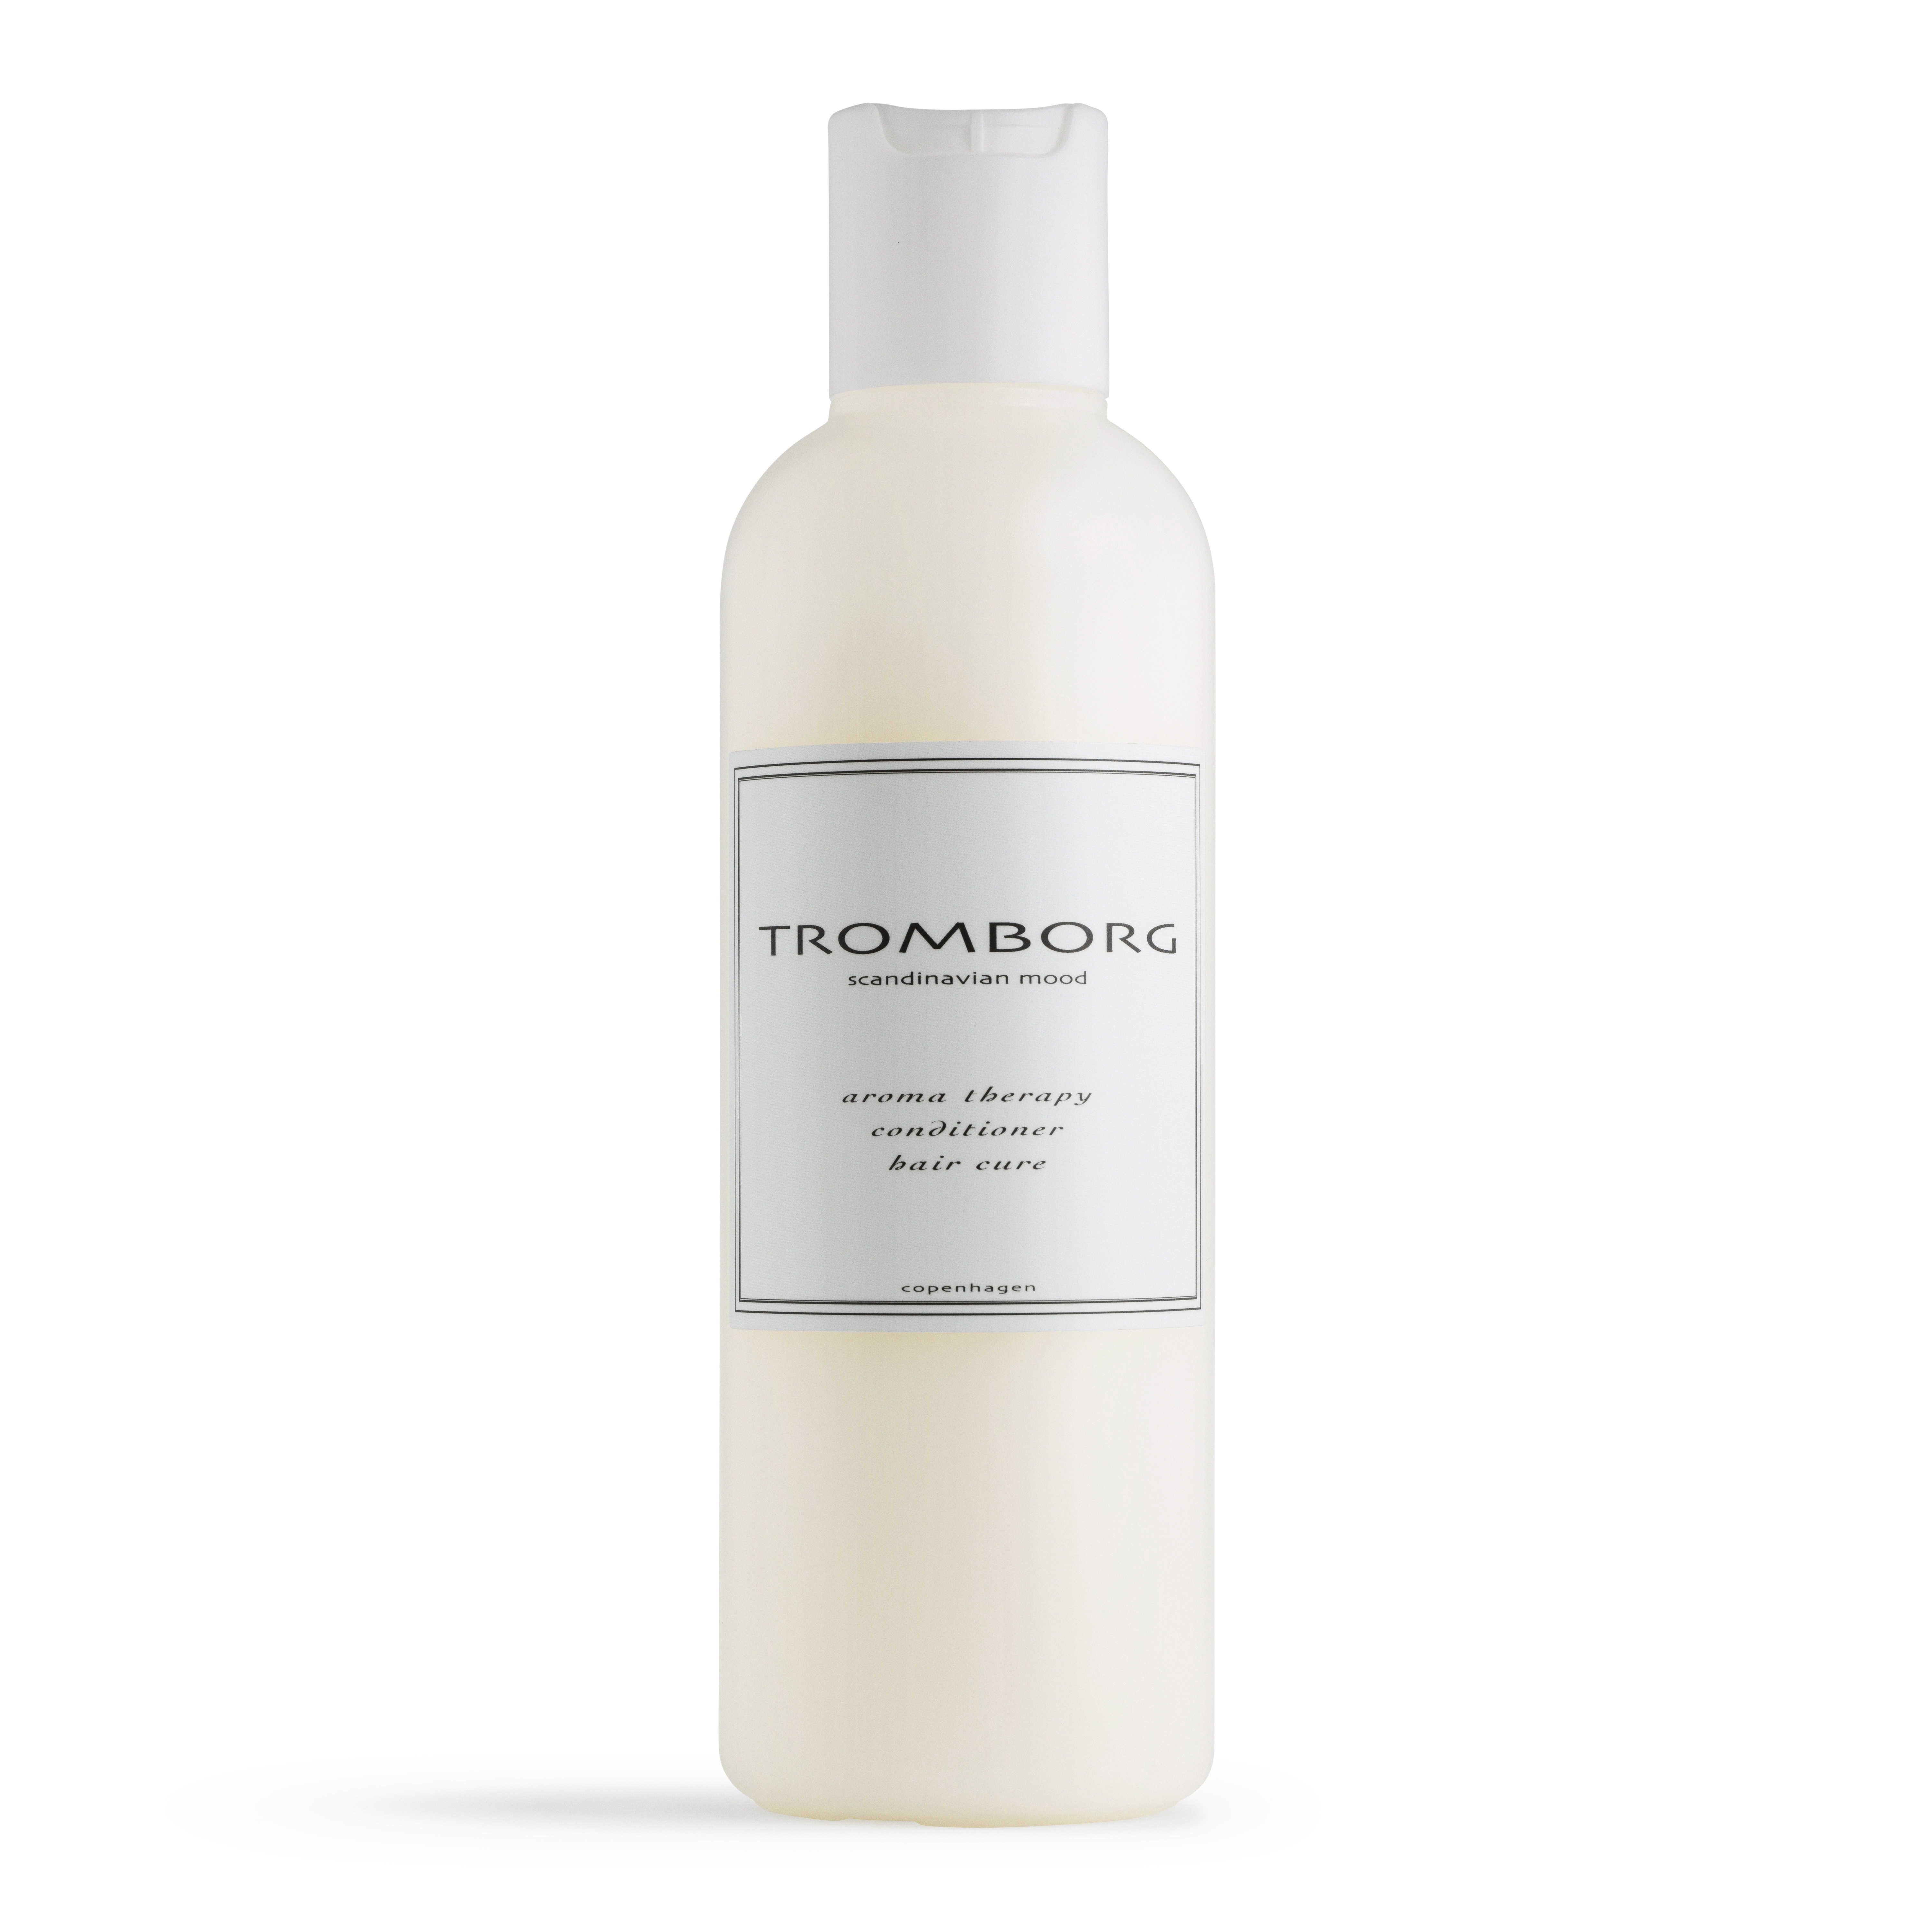  Aroma Therapy Conditioner Hair Cure